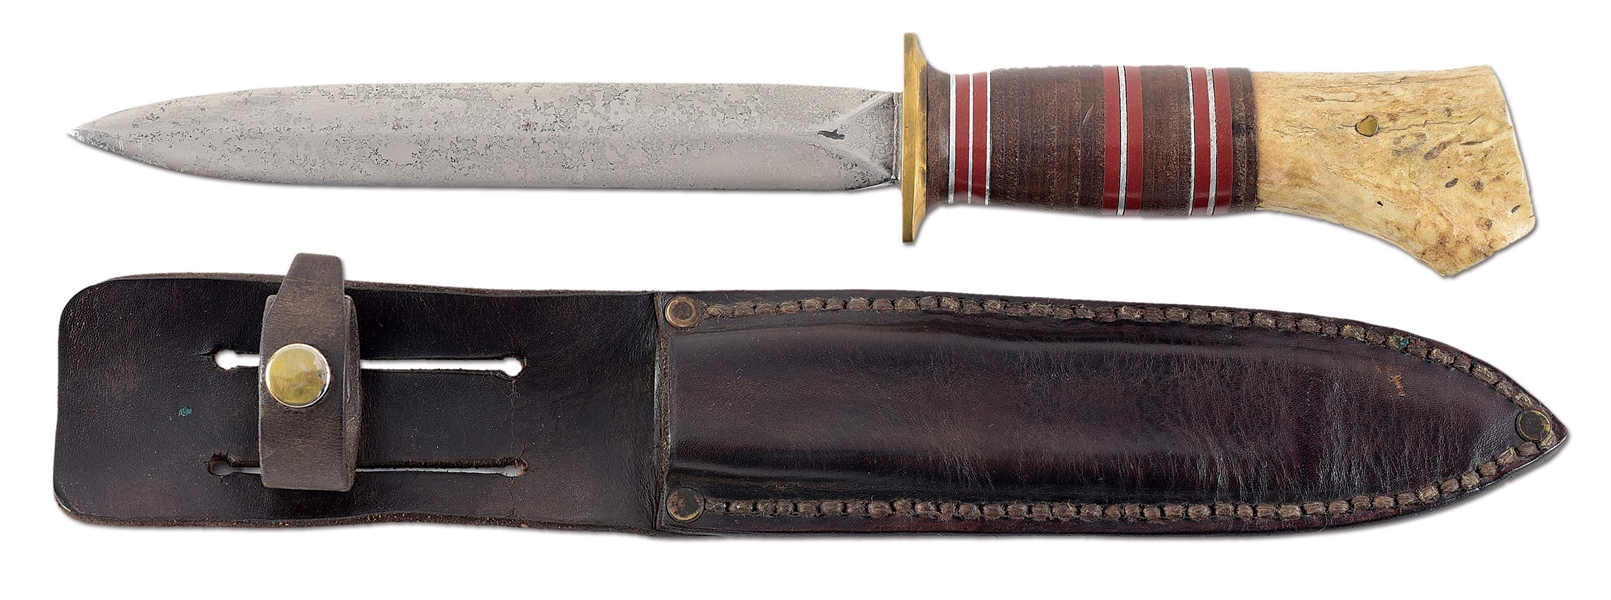 FINE DOUBLE EDGED SCAGEL FIGHTING KNIFE WITH ORIGINAL SHEATH (1910-1916).